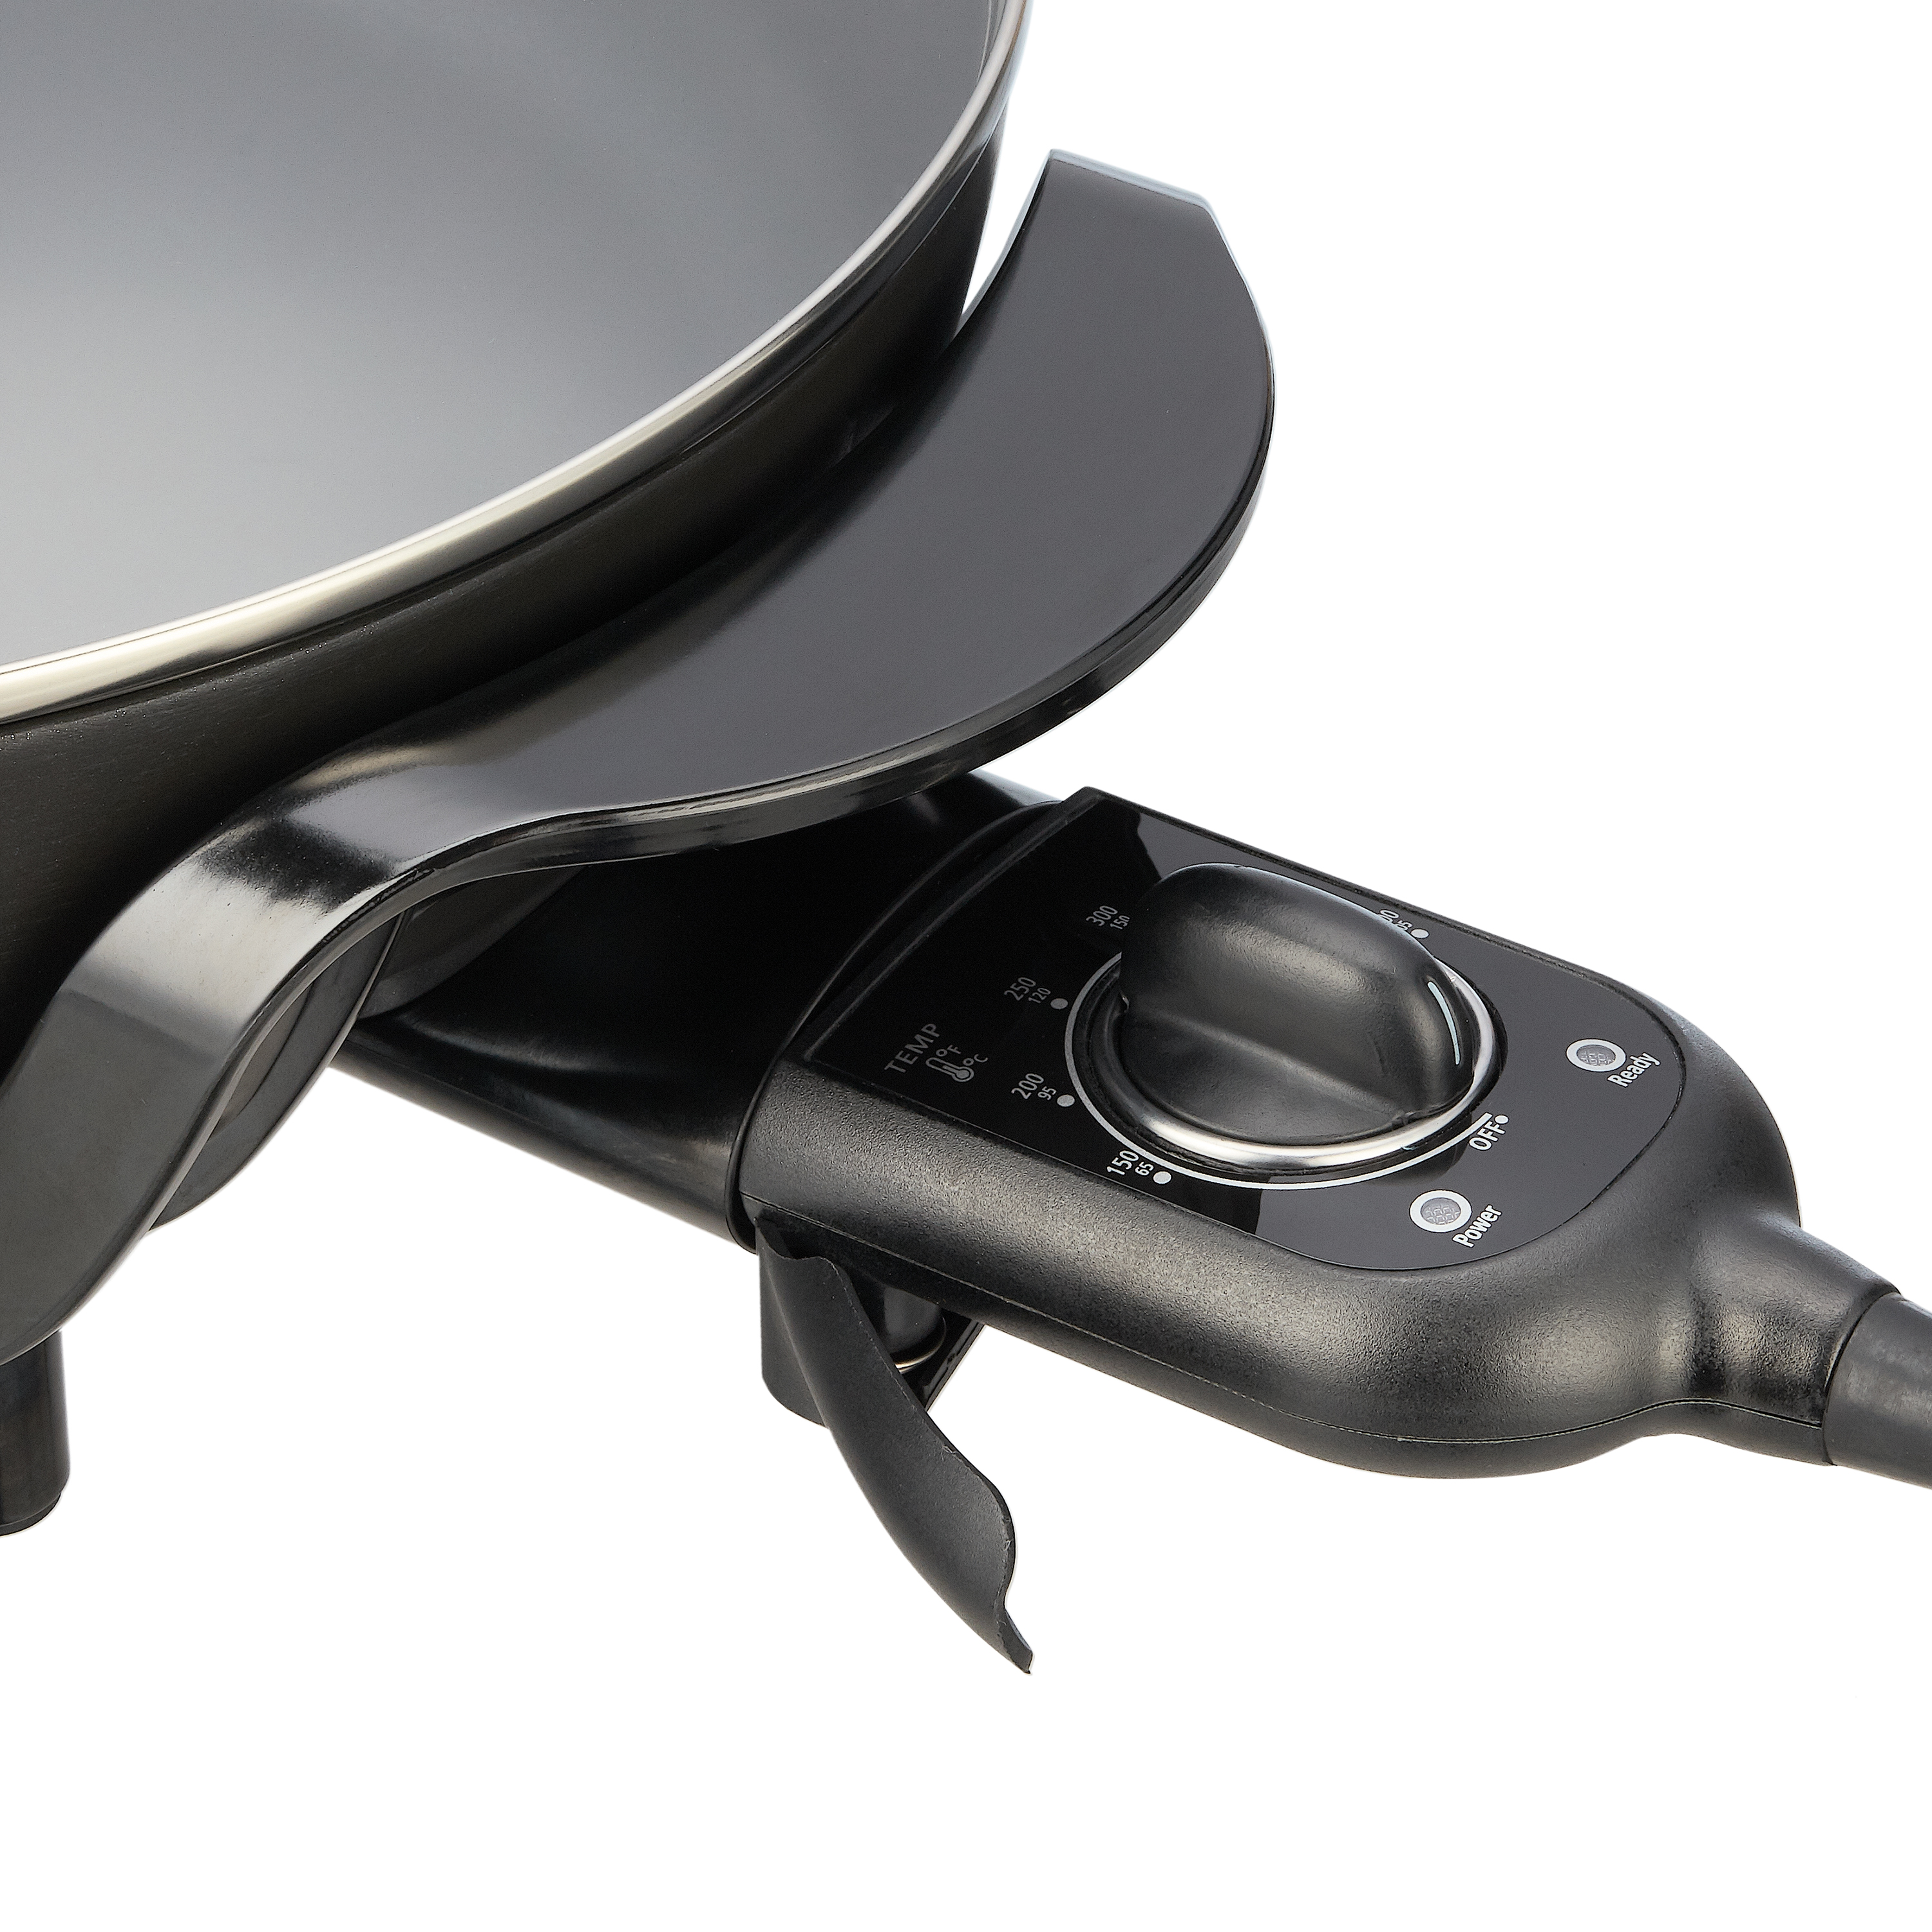 Mainstays 12" Round Nonstick Electric Skillet with Tempered Glass Cover, Mainstays Black - image 4 of 4